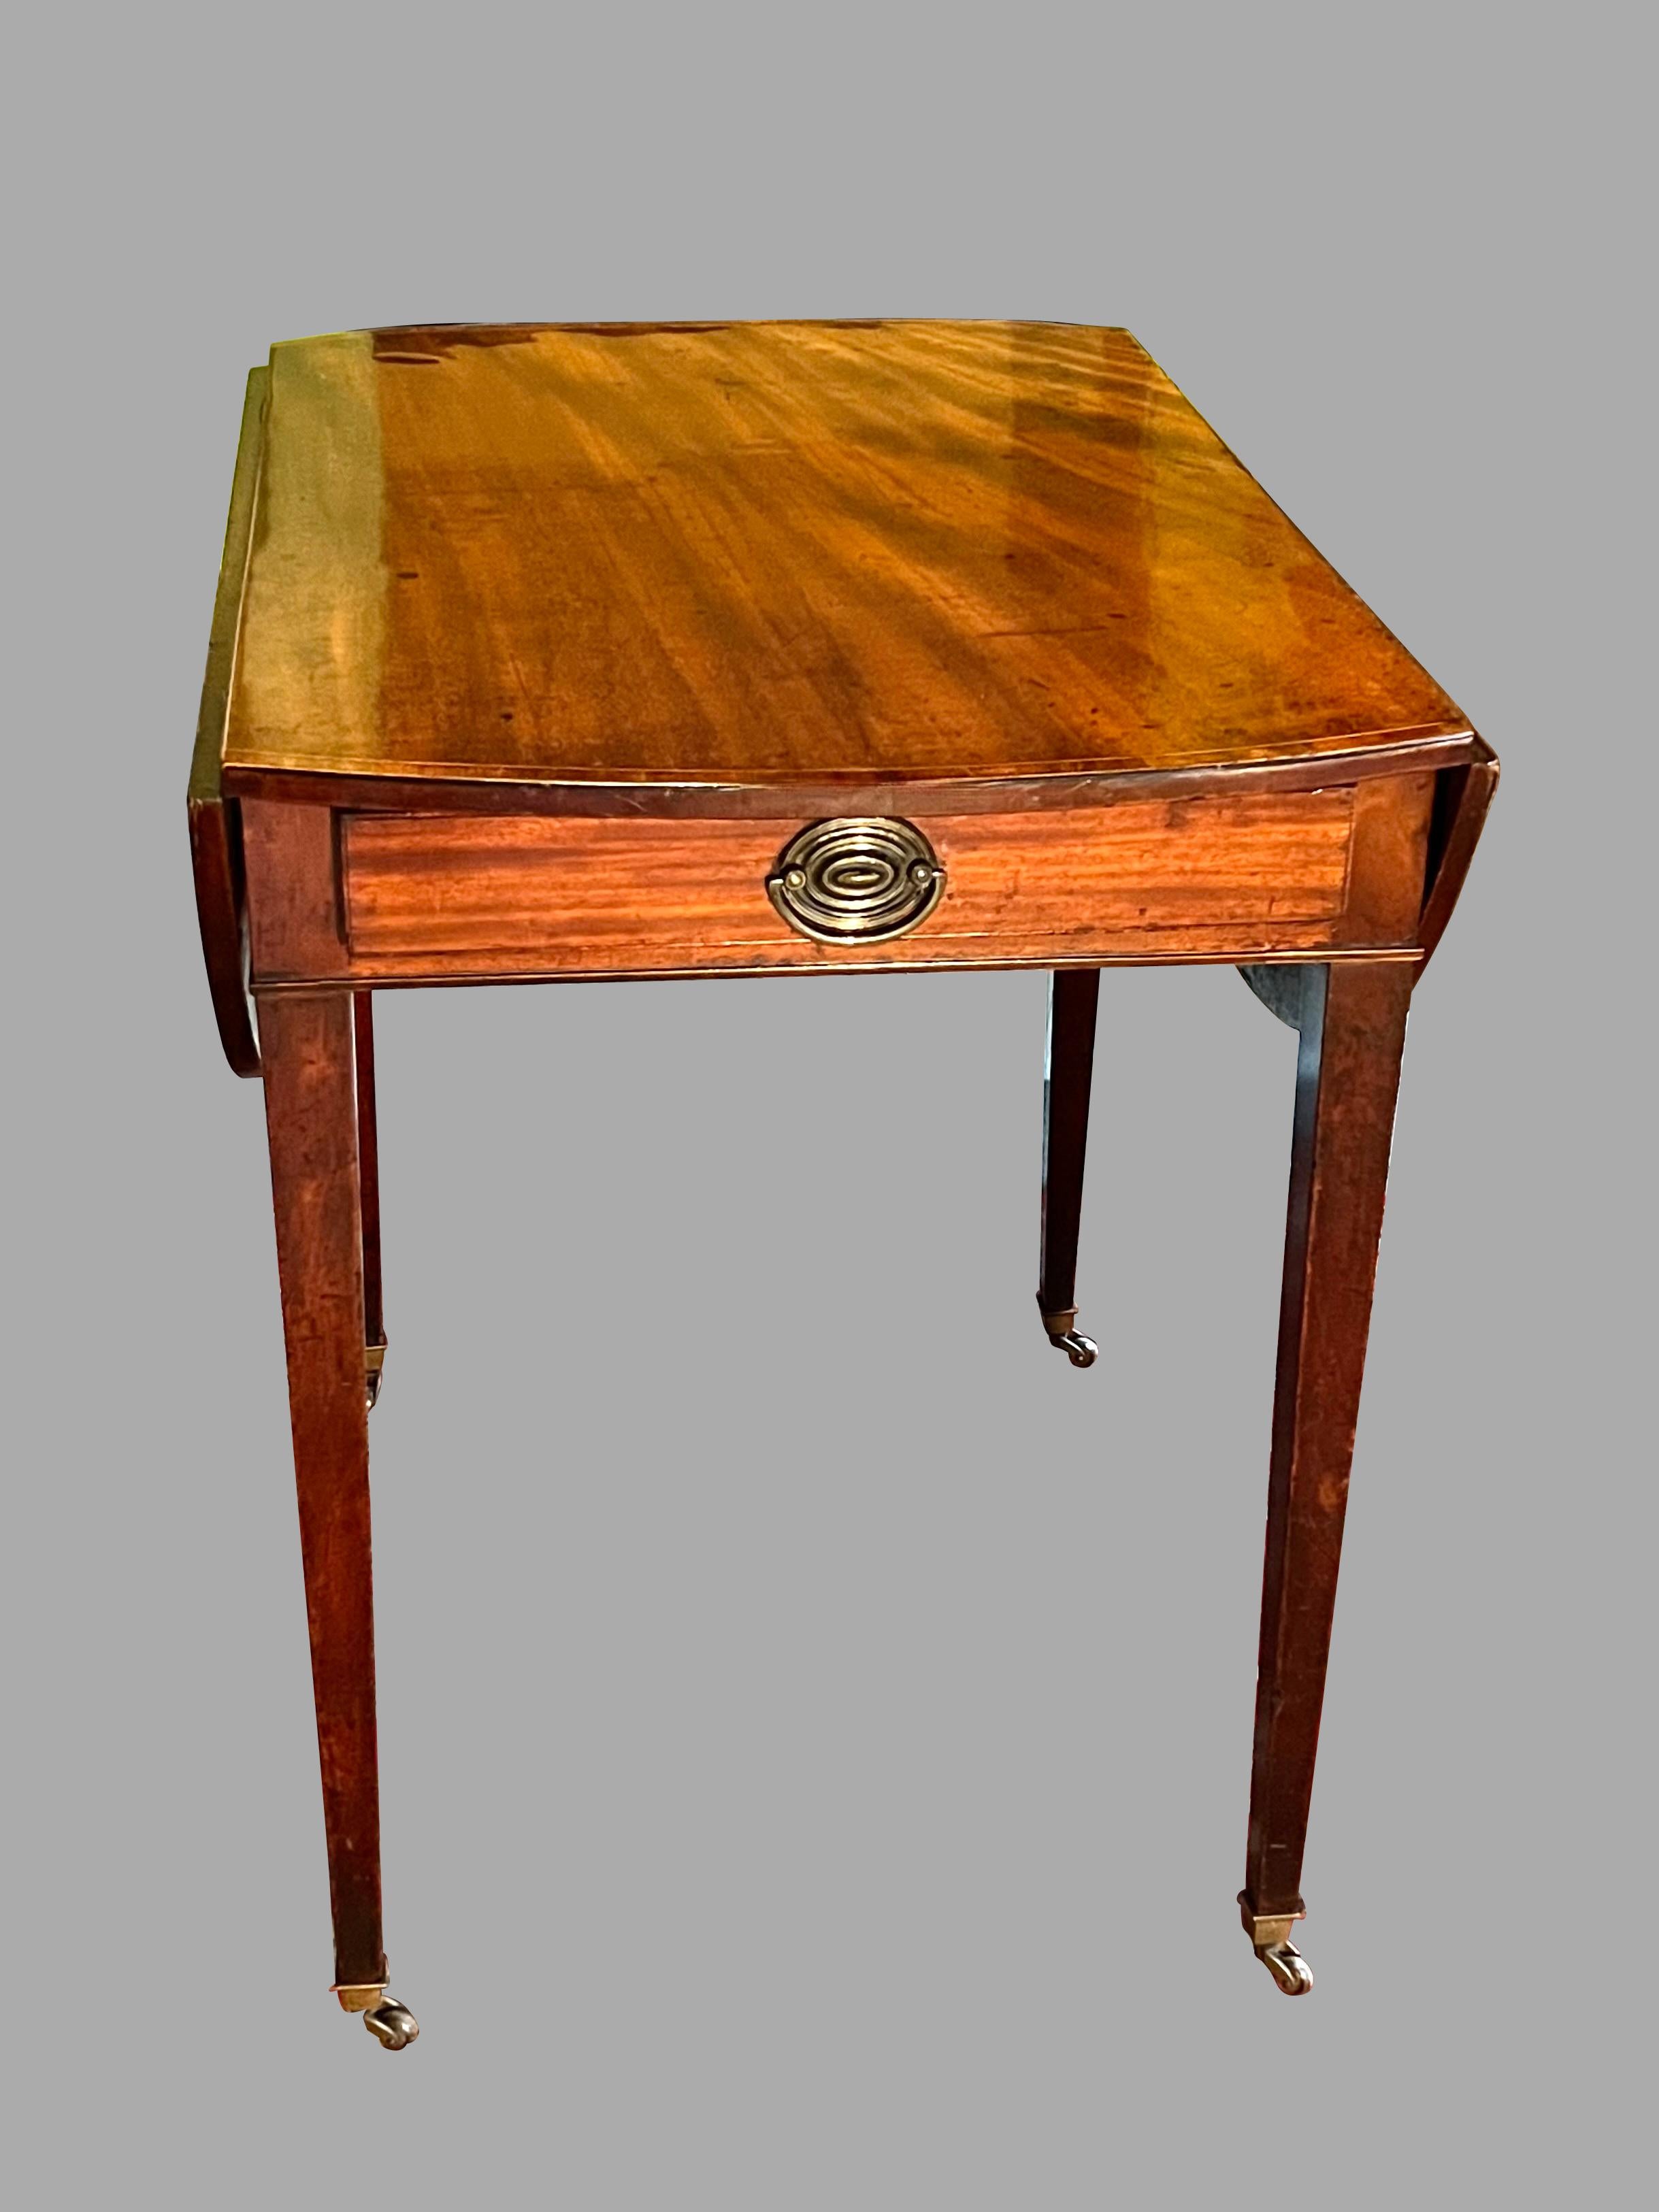 Fine English Inlaid Mahogany Hepplewhite Period Pembroke Table with Drawer In Good Condition For Sale In San Francisco, CA